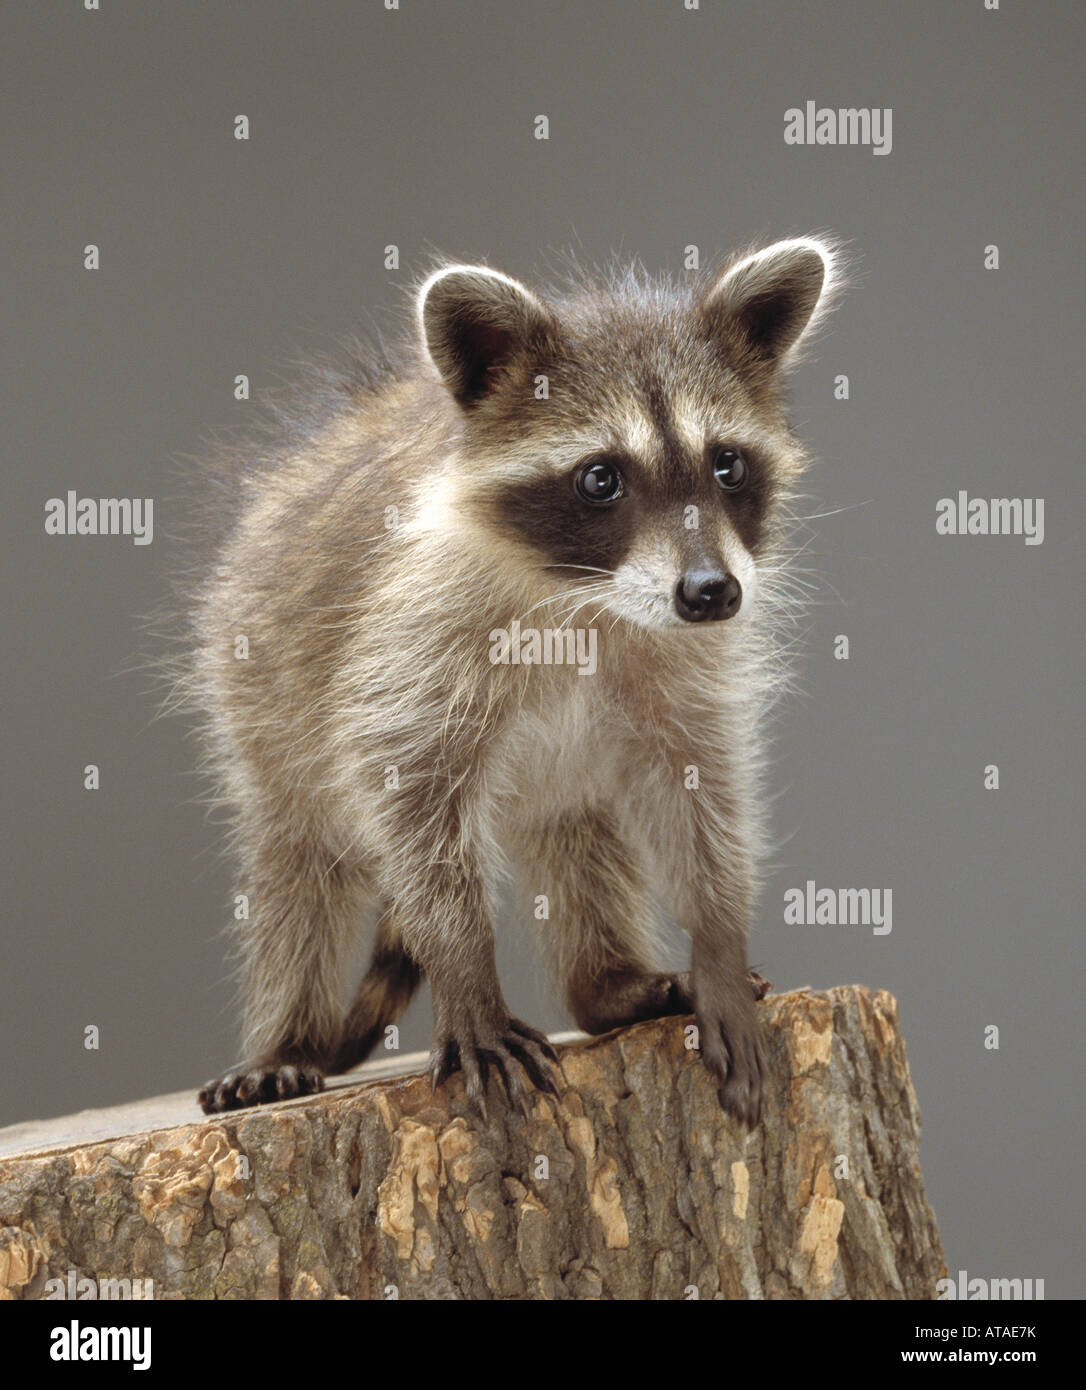 A juvenile racoon looks curious while sitting on a tree stump. Stock Photo